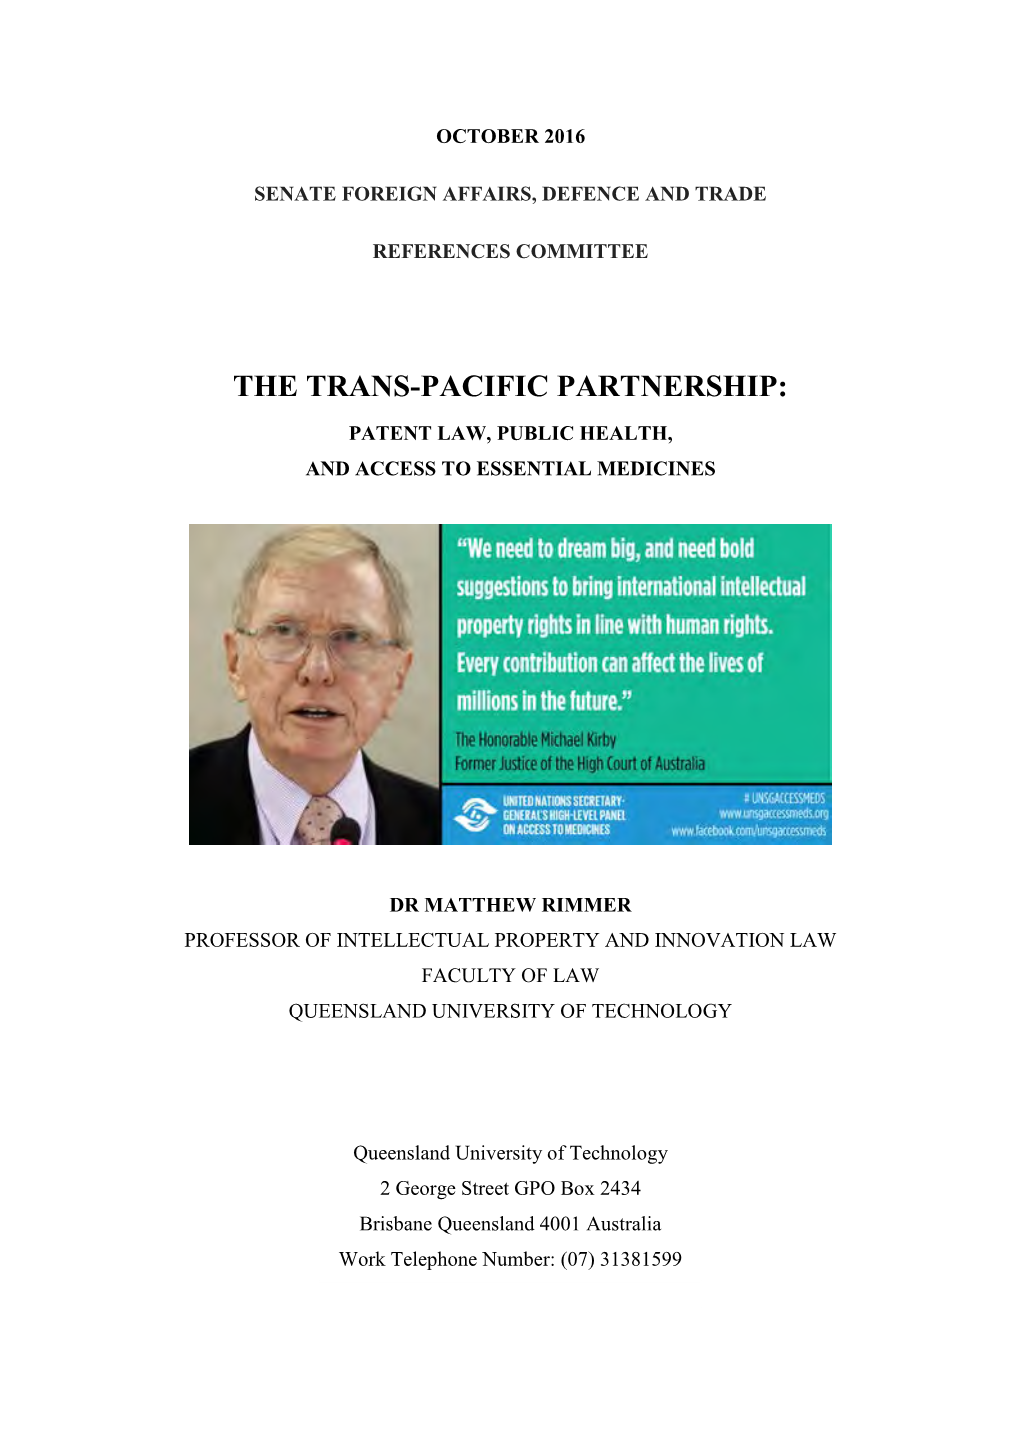 The Trans-Pacific Partnership: Patent Law, Public Health, and Access to Essential Medicines